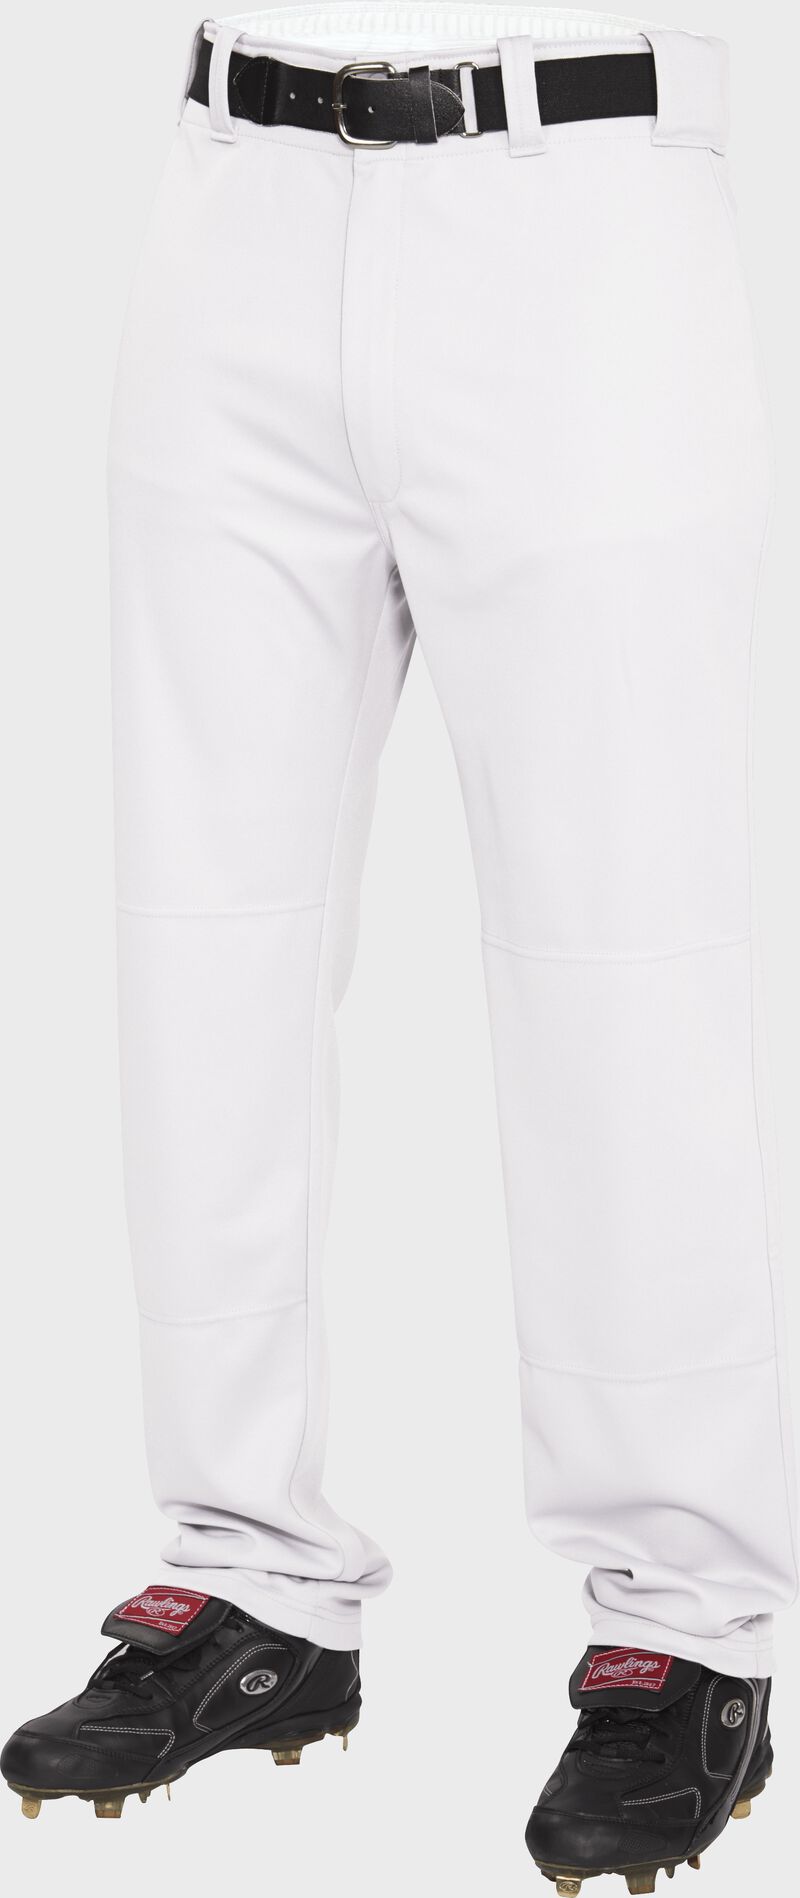 White semi-relaxed baseball pants with a black belt and black cleats - SKU: MODBP31SR-W image number null